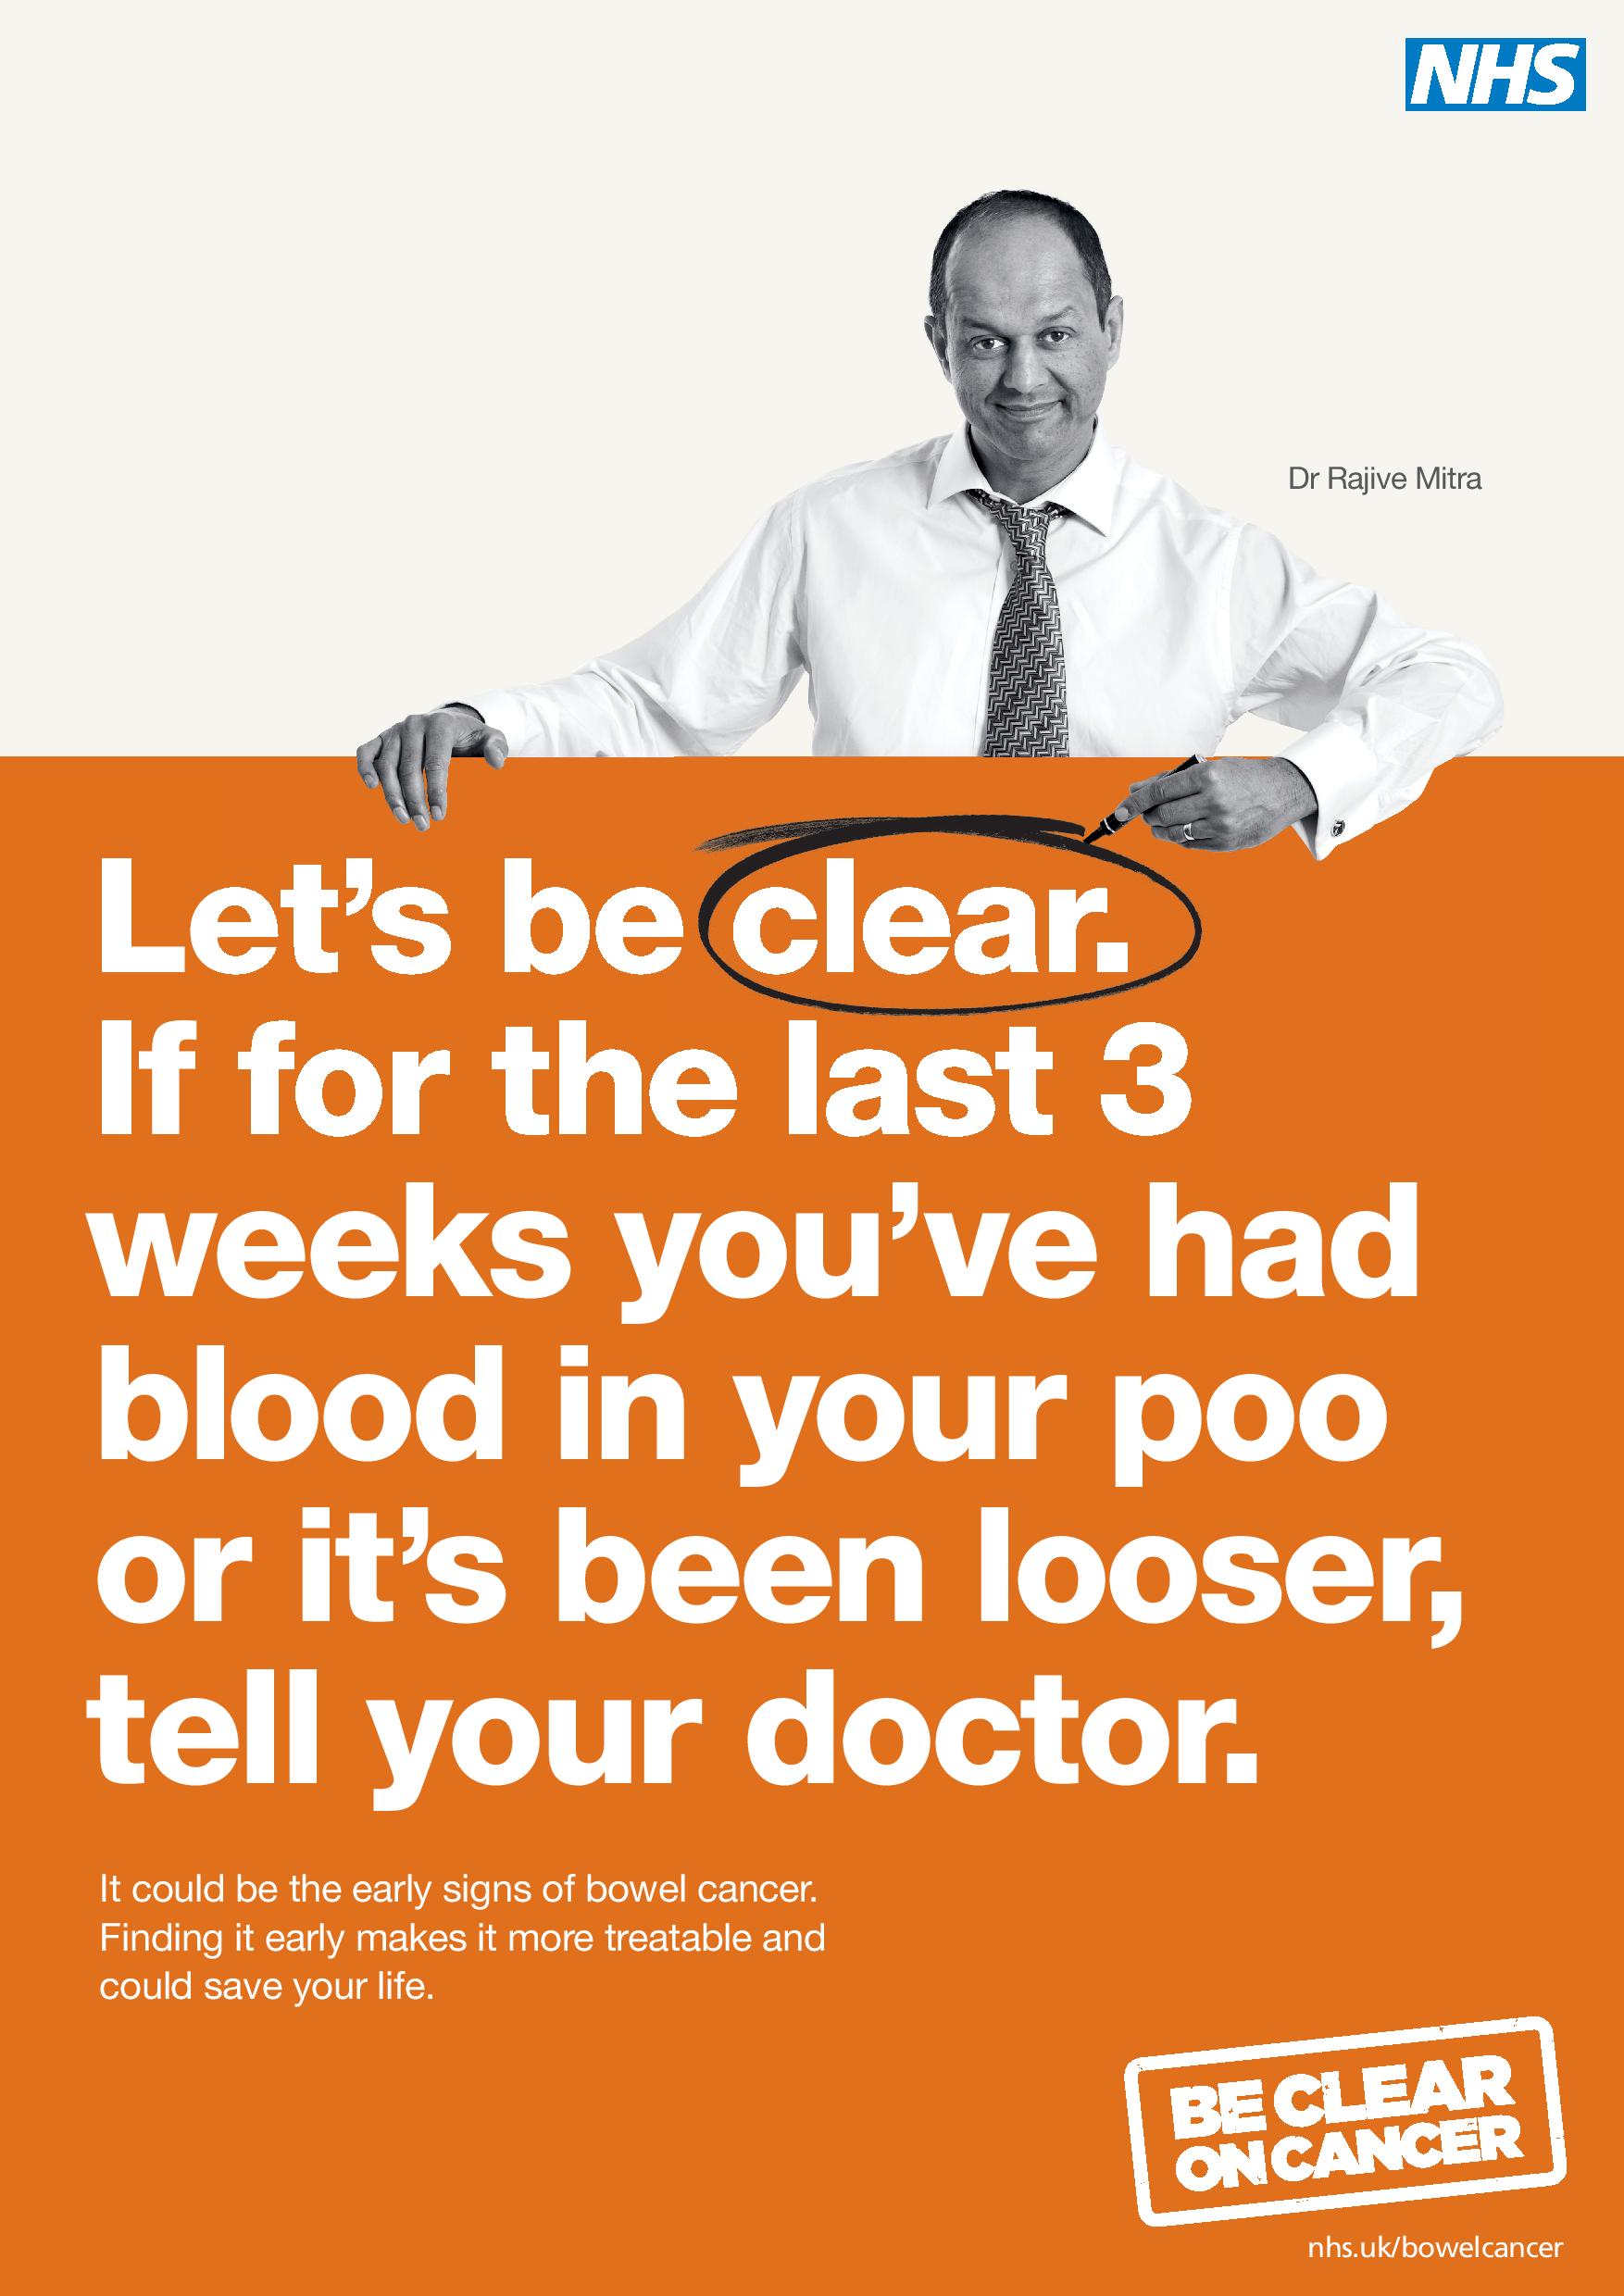 Let's be clear. If for the last 3 weeks you've had blood in your poo or it's been looser, tell your doctor